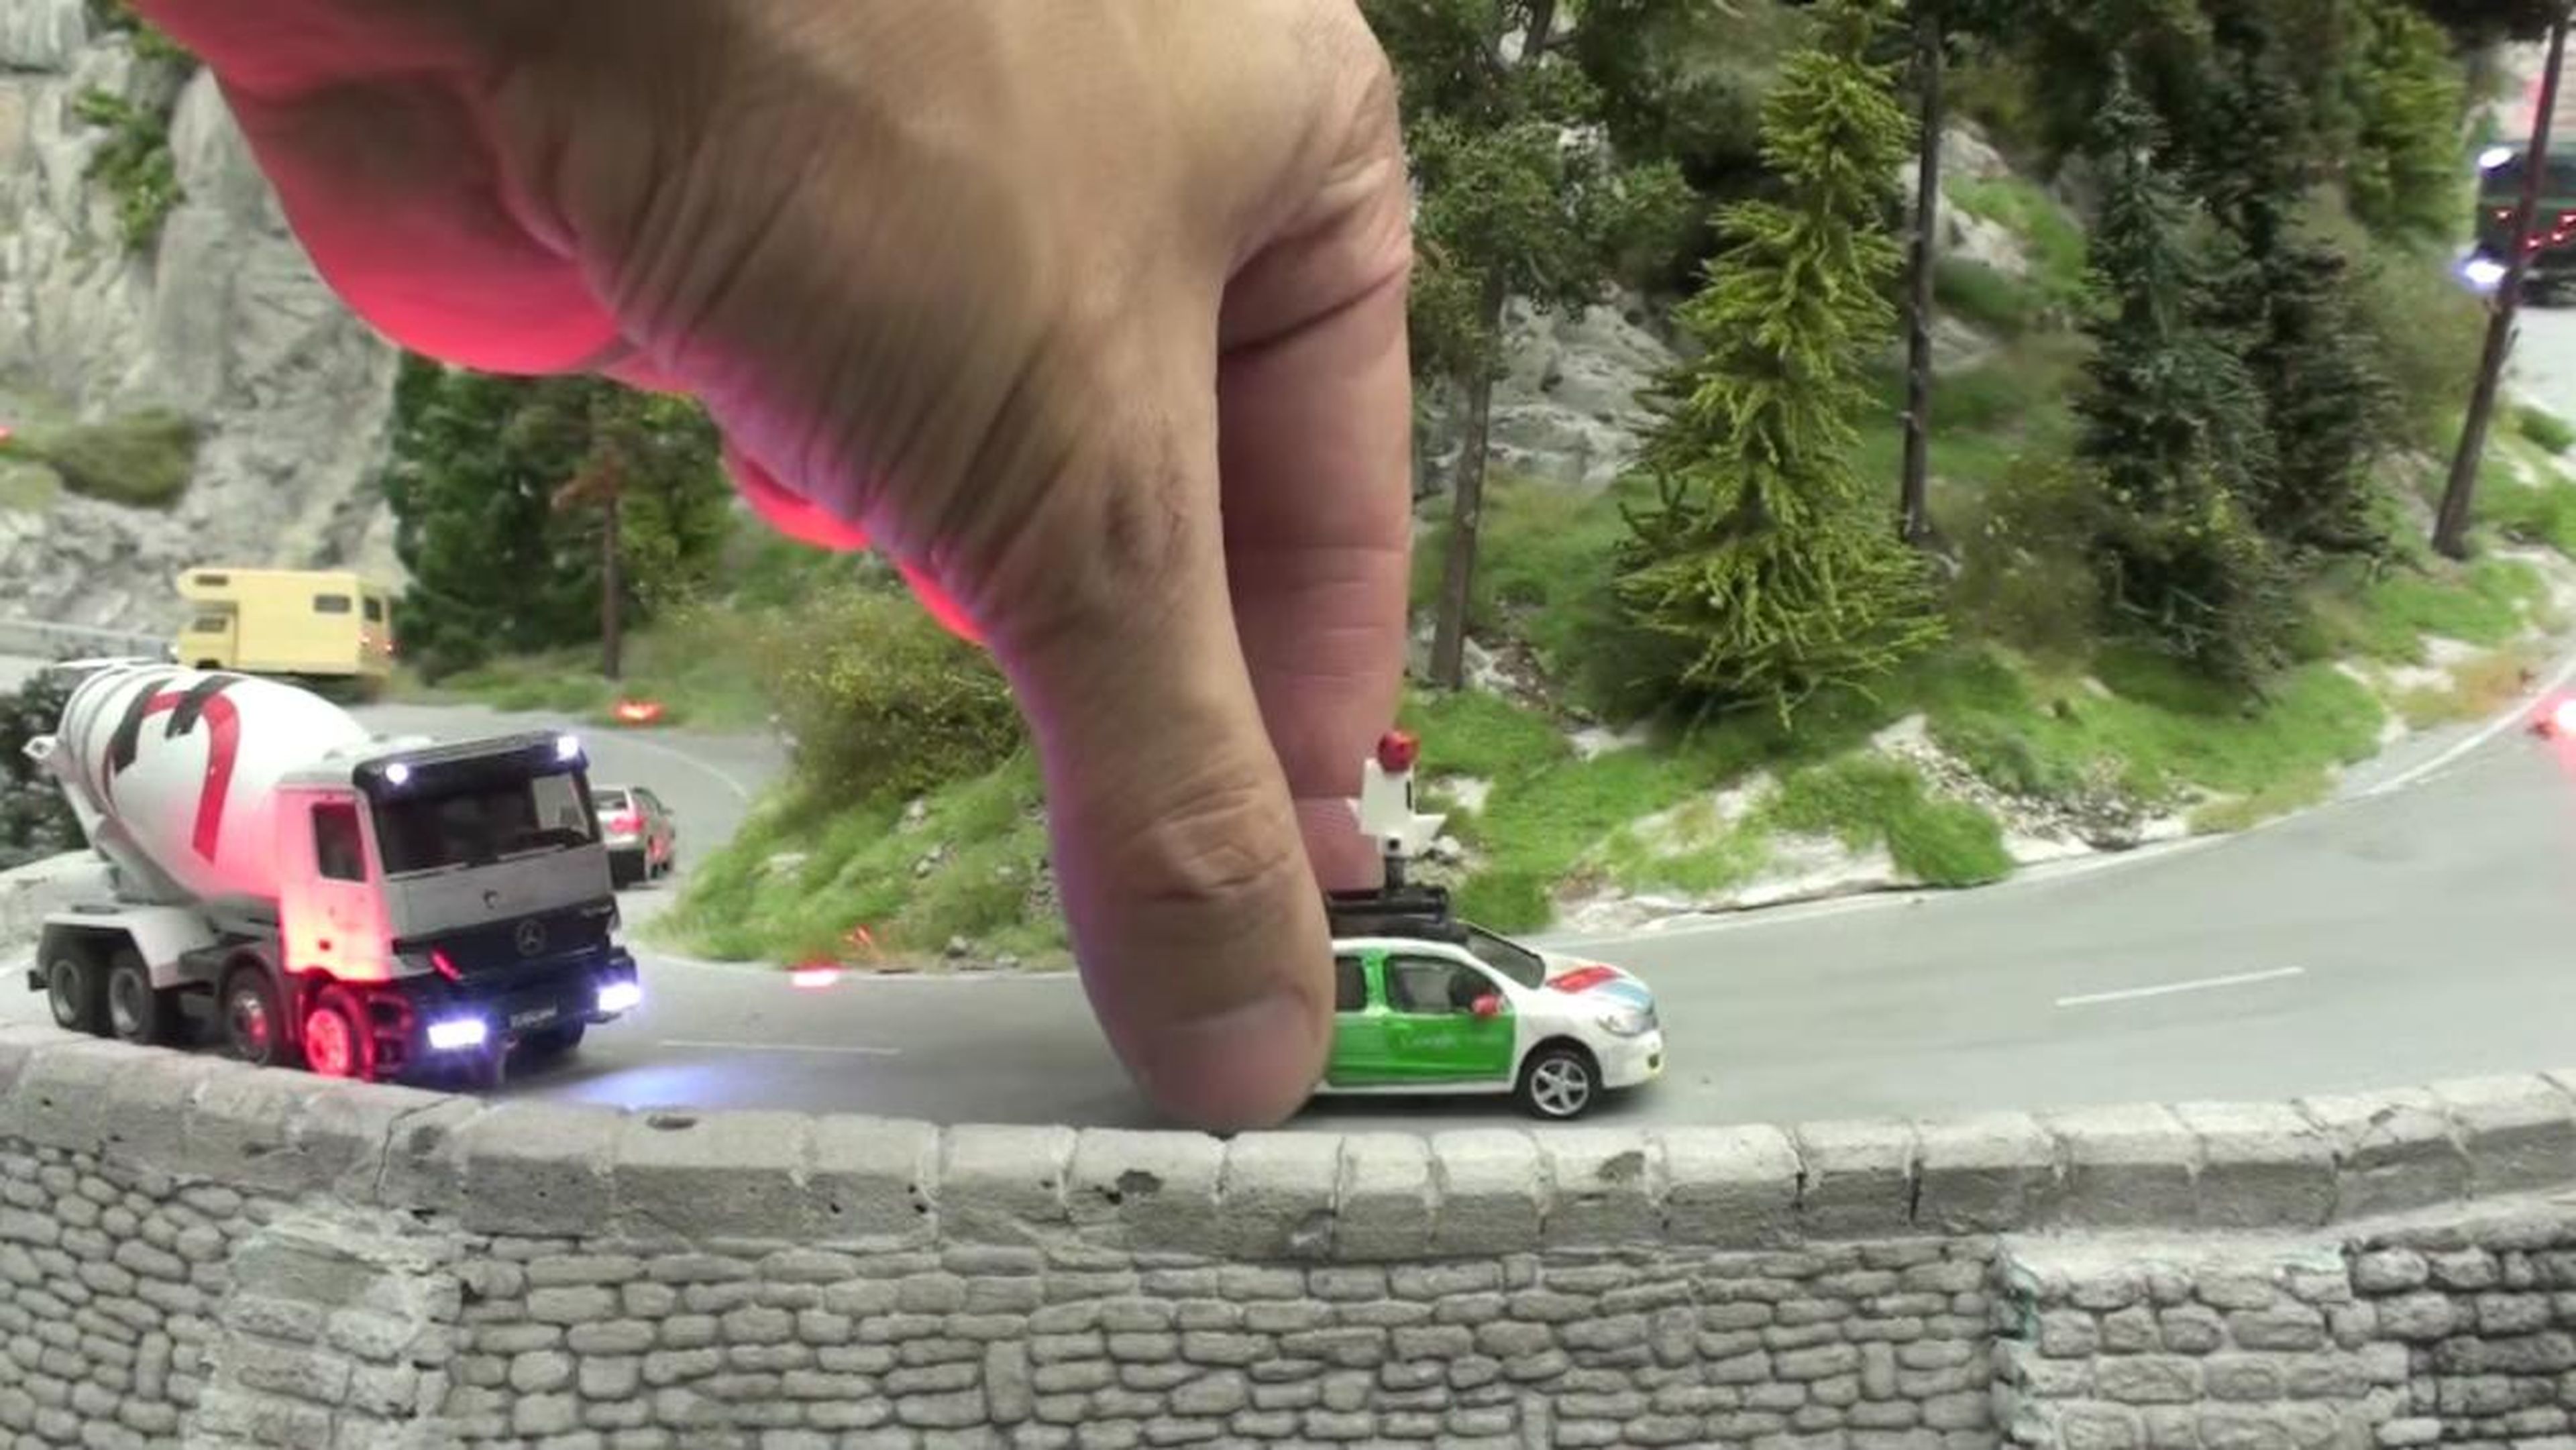 The Google car starts off on a road outside a replica of the famous Neuschwanstein Castle in Bavaria.